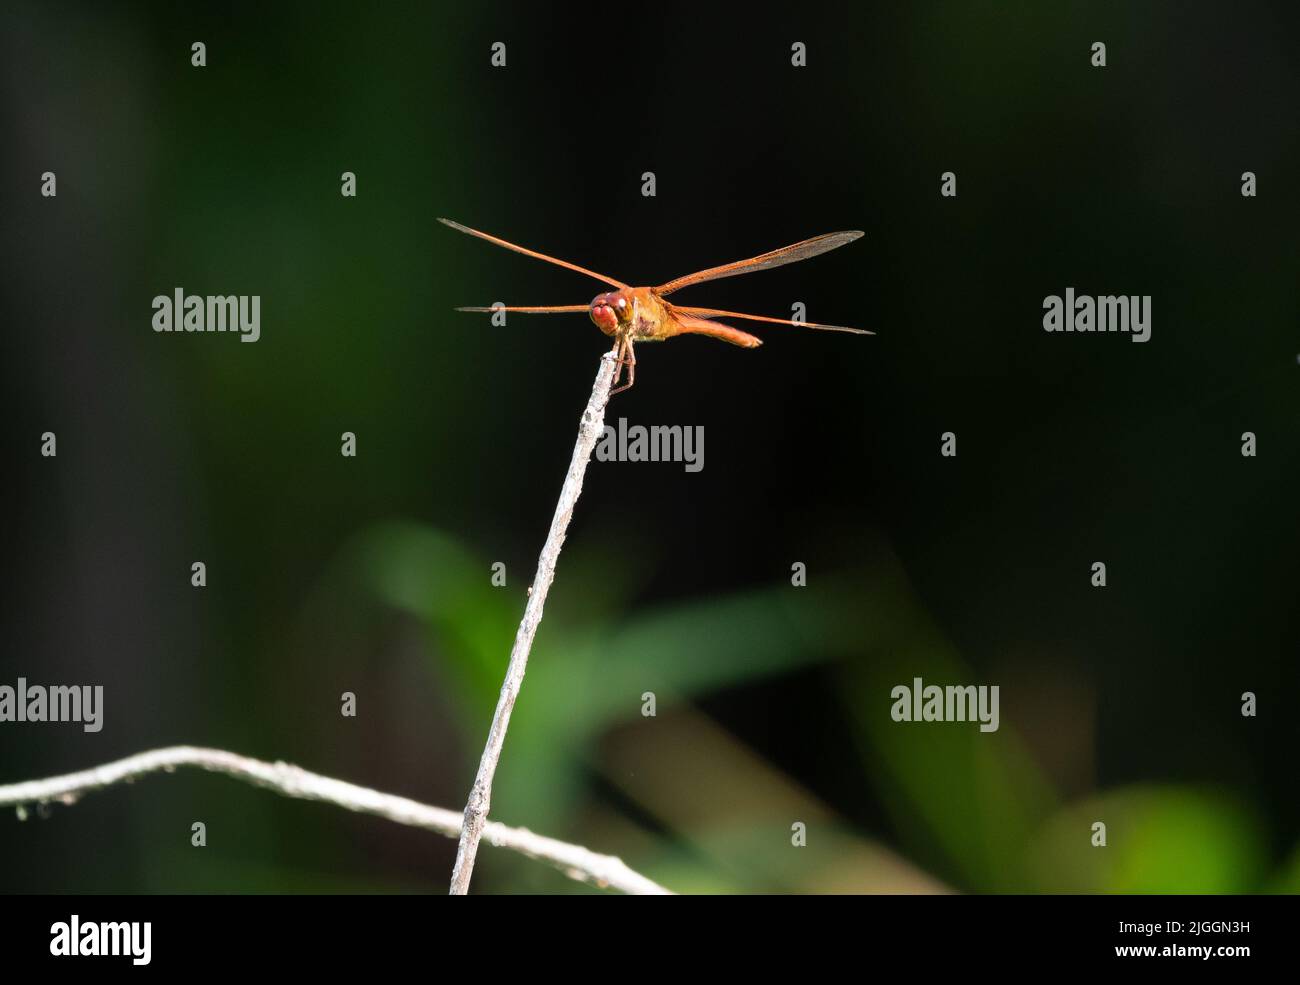 Golden-winged skimmer or Libellula auripennis dragonfly perched on a dried branch. Photographed with a shallow depth of field. Stock Photo